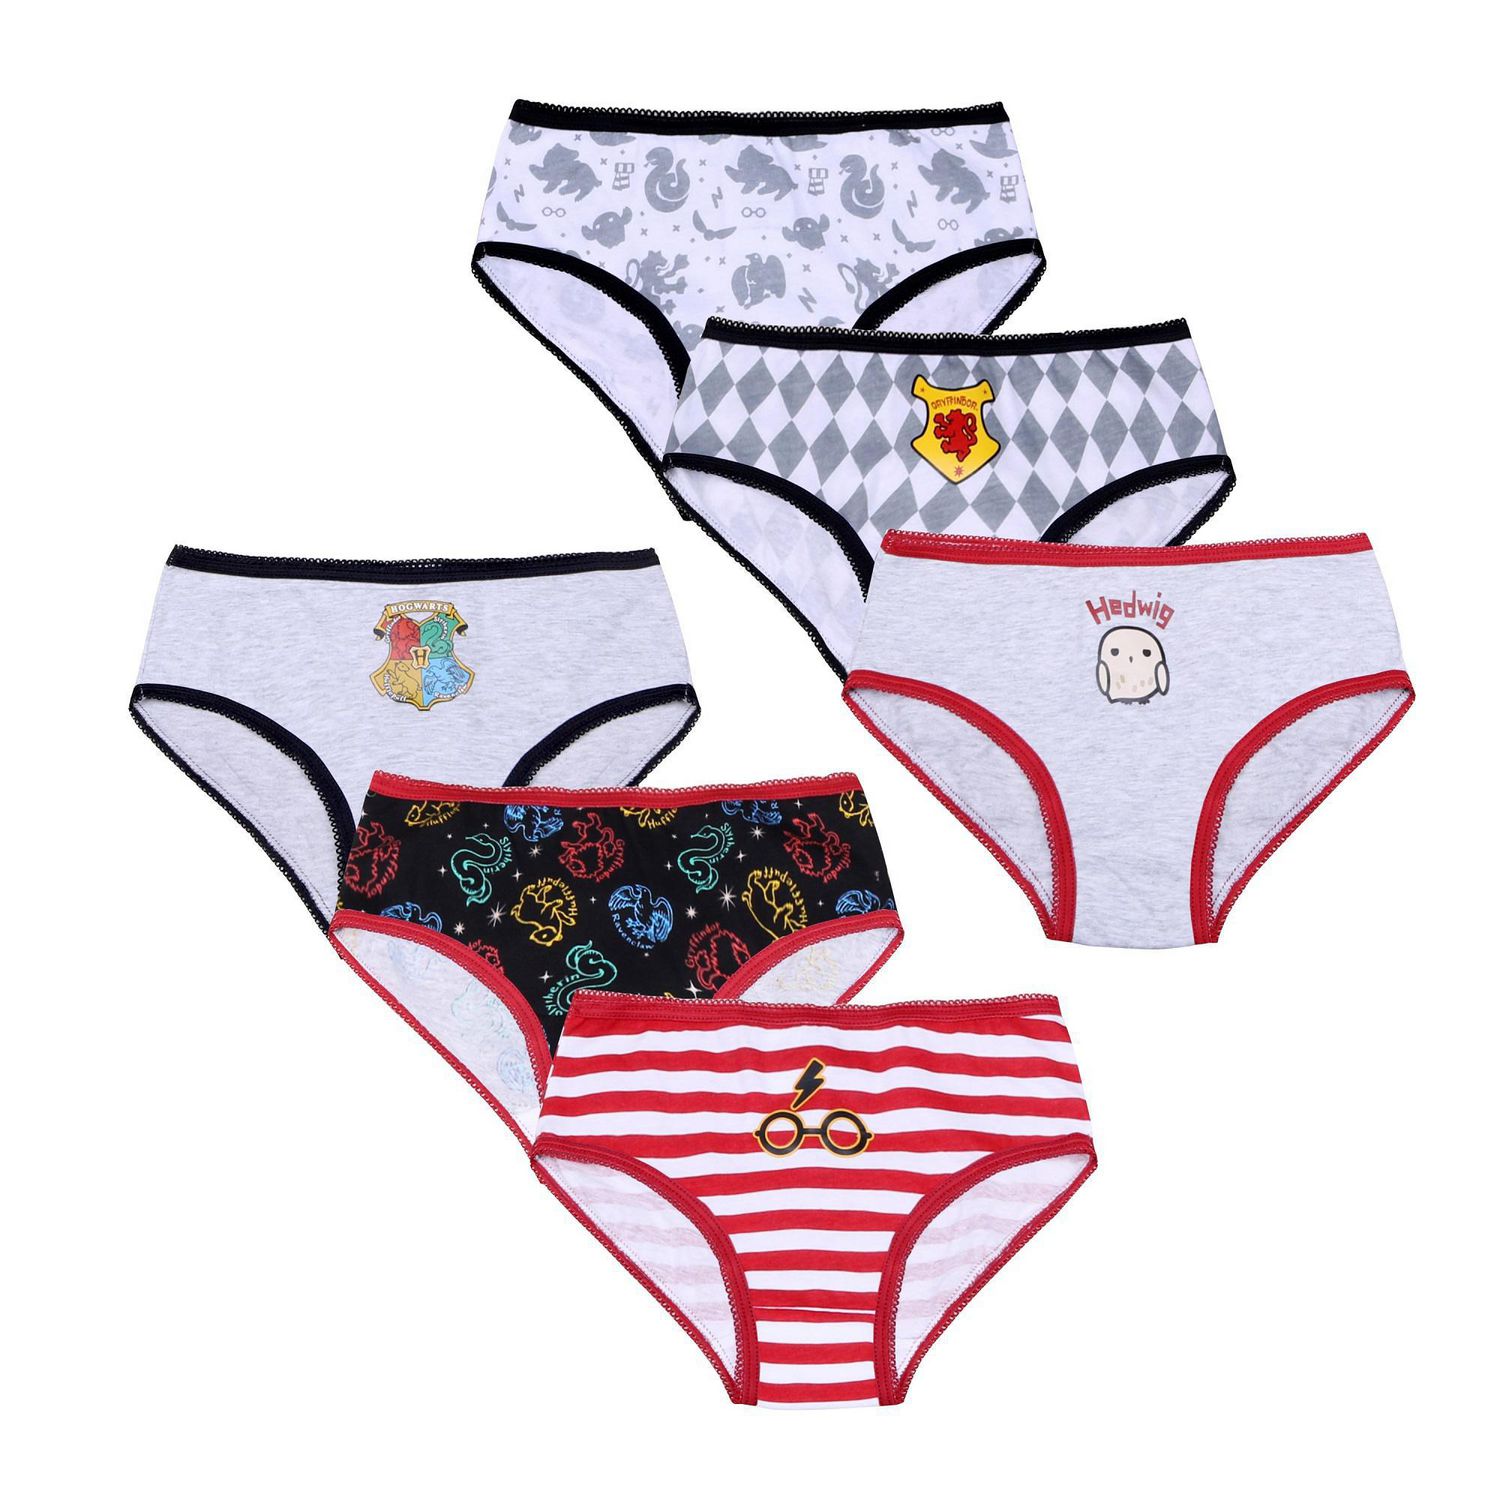 Harry Potter Girls Hogwarts Knickers Pack of 5 